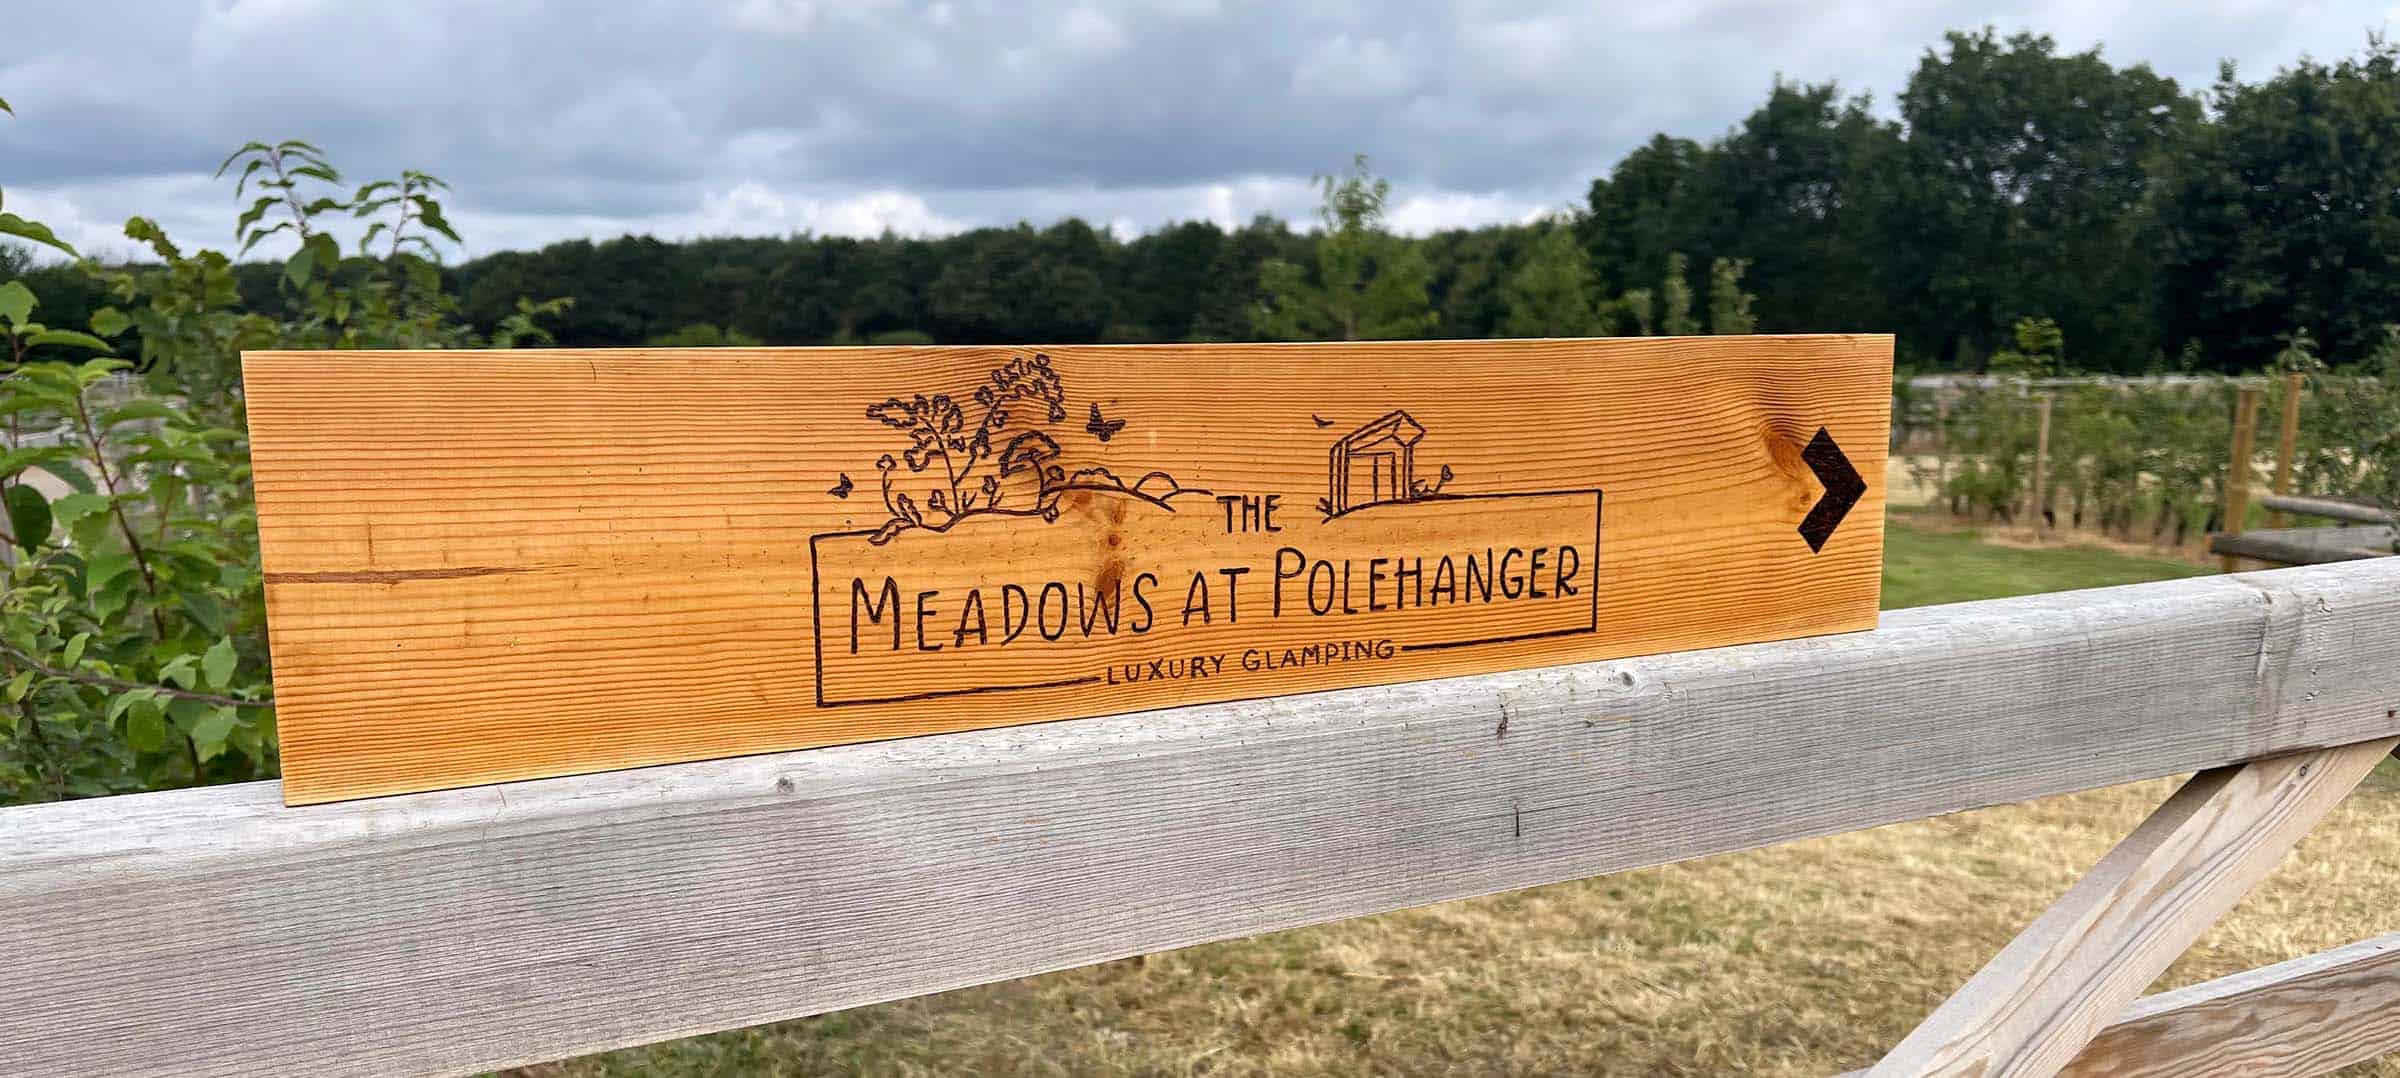 The Meadows at Polehanger wooden sign